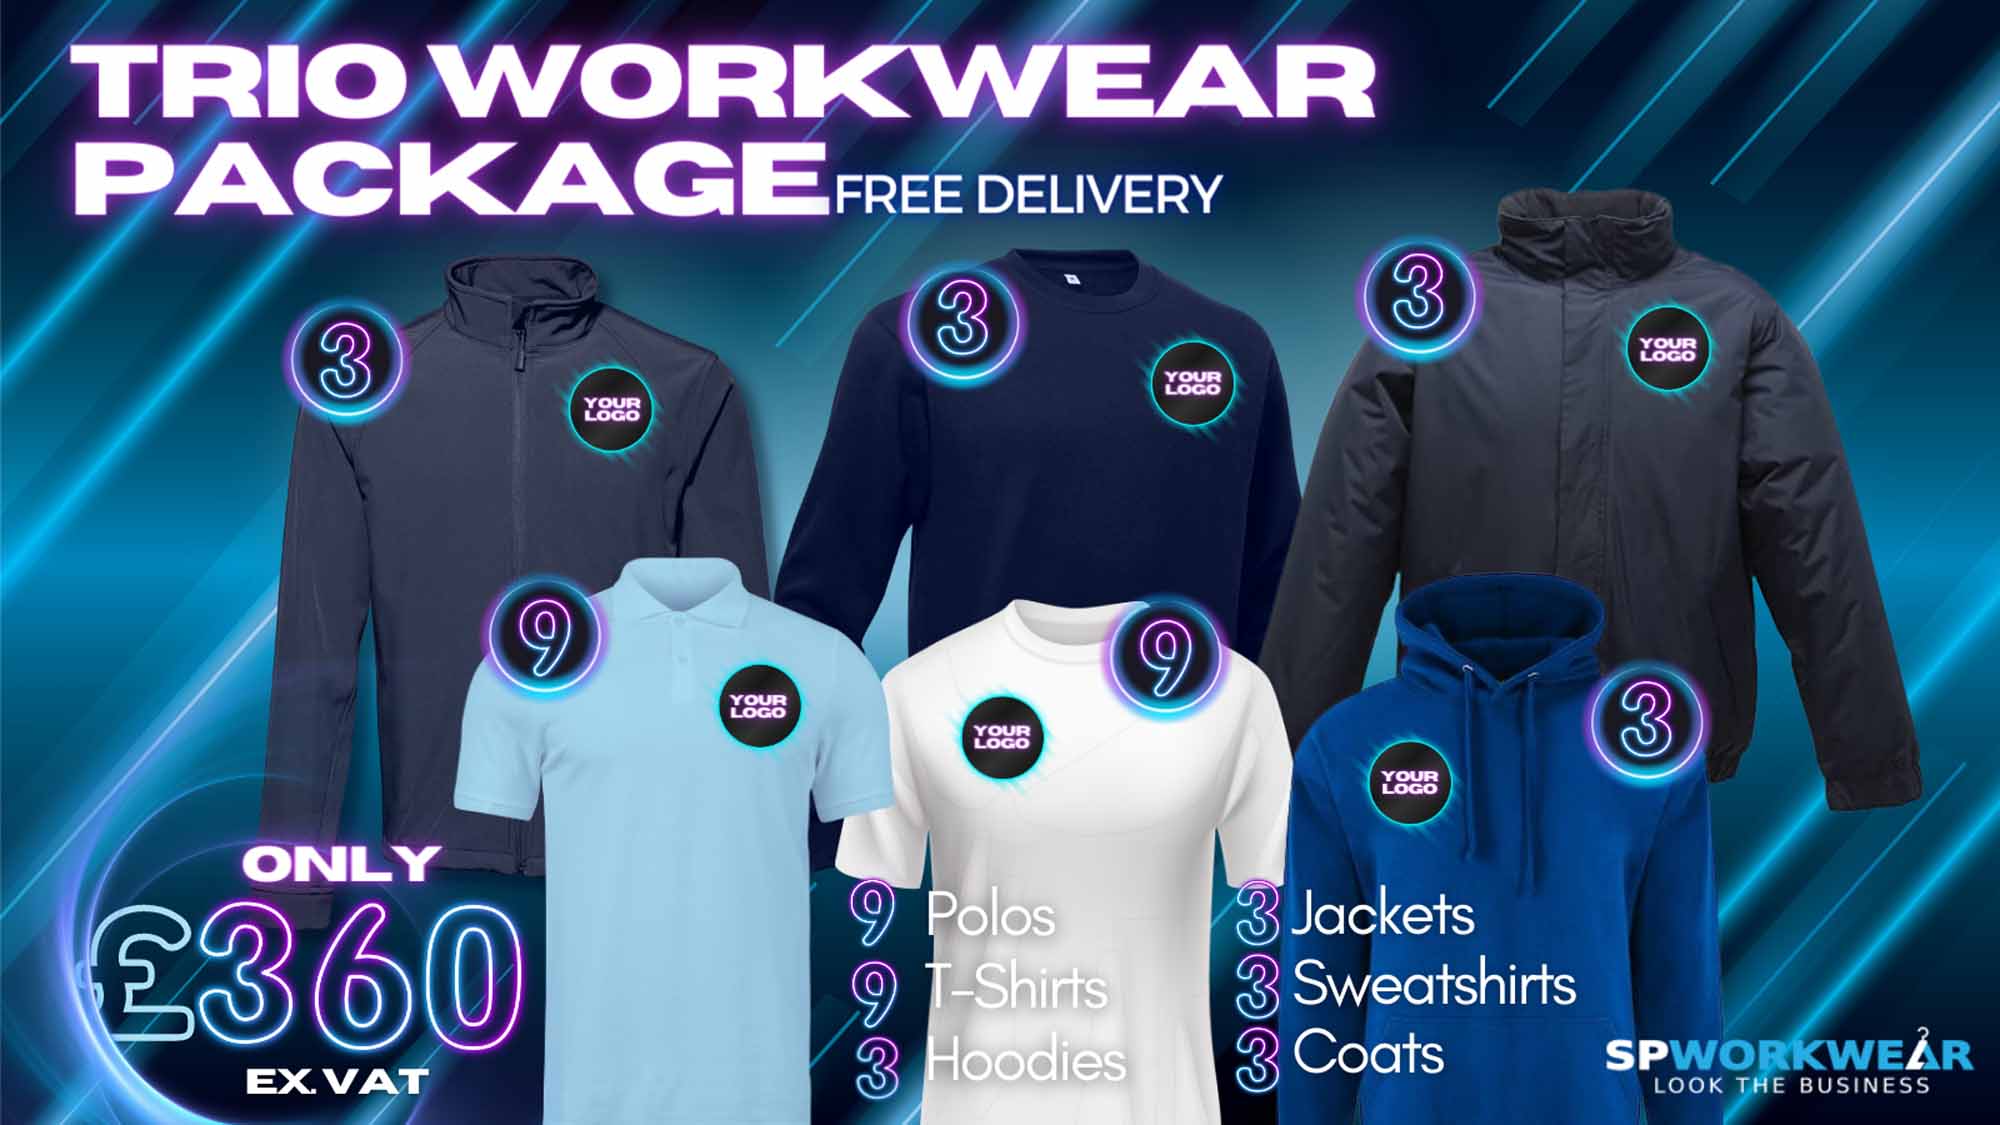 The Trio Workwear Package